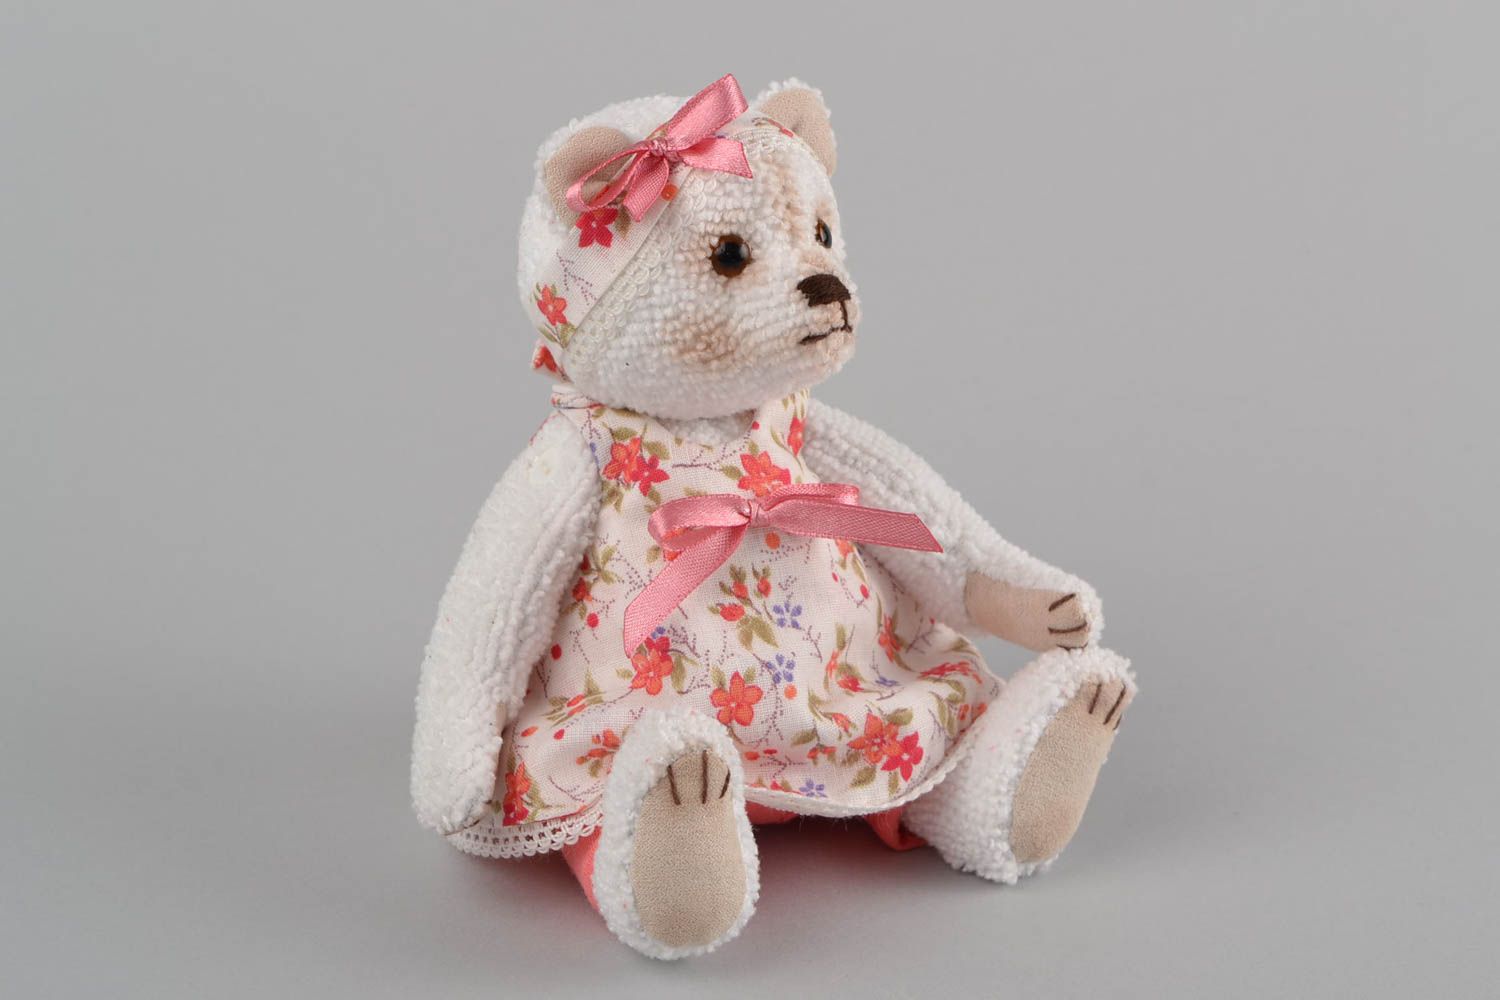 Handmade designer small fabric soft toy white bear in floral dress with headband photo 1